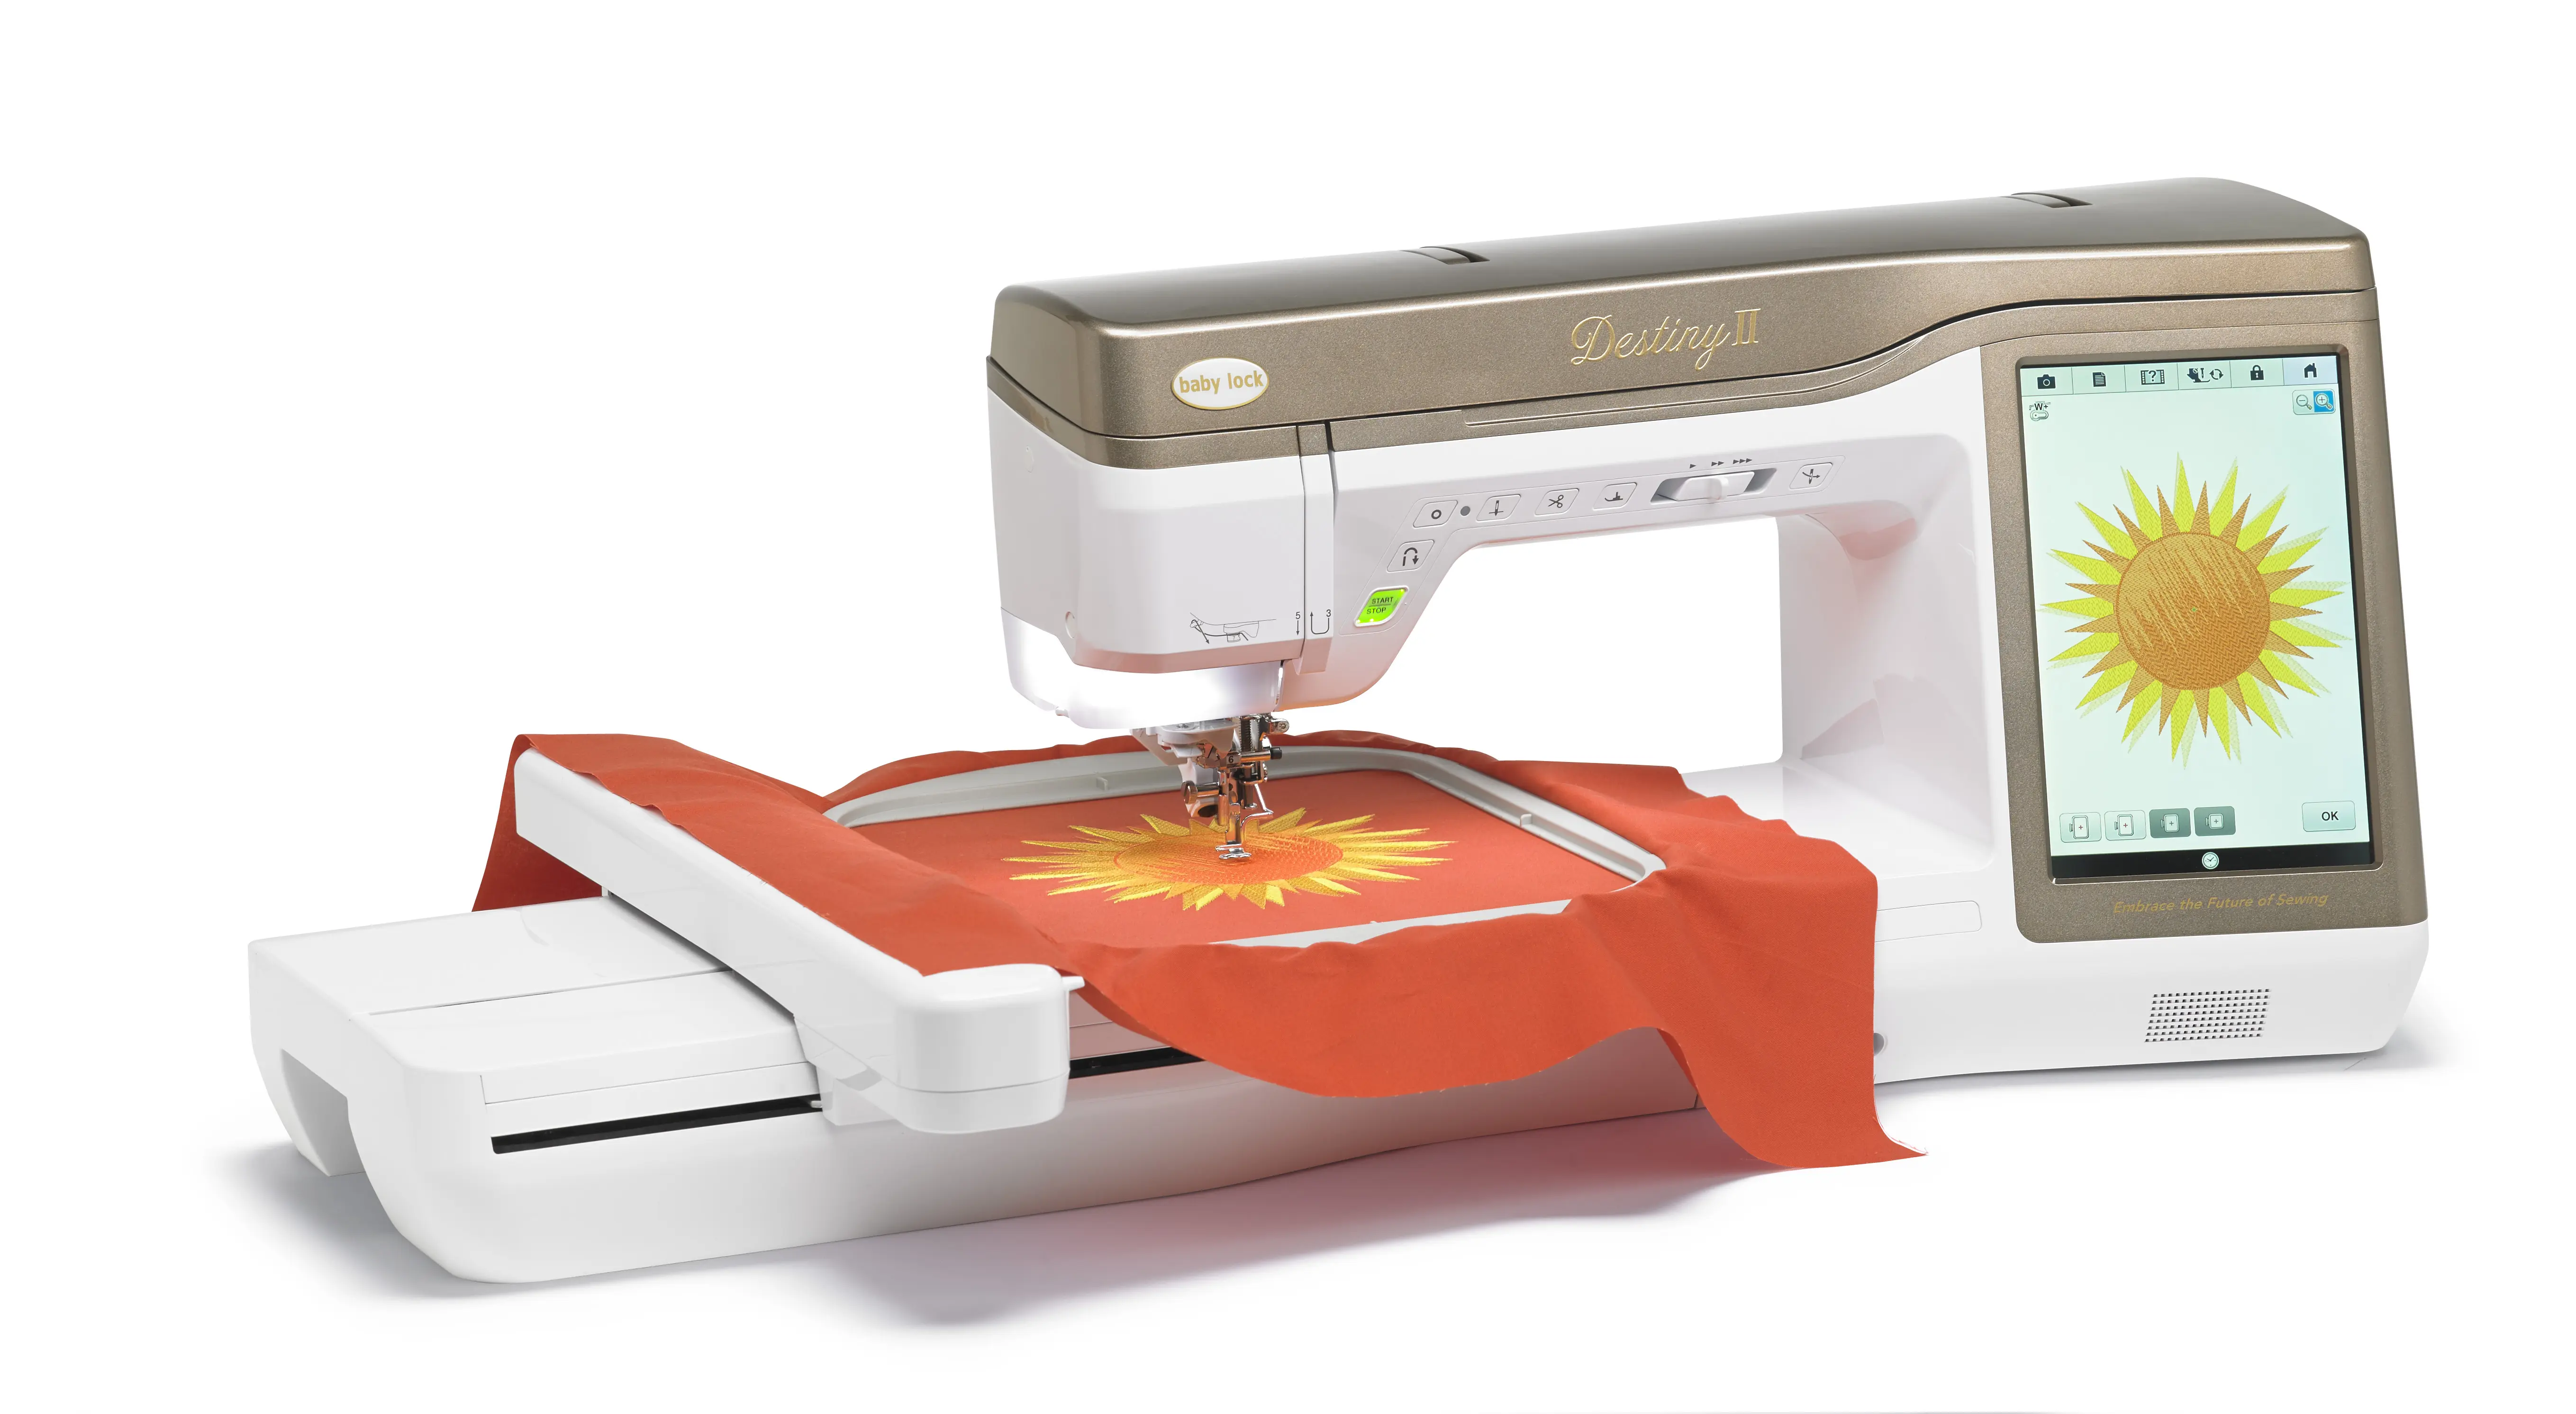 New Price Baby-Locks Destinys 2 II Sewing - Embroidery - Quilting Computerized Machine